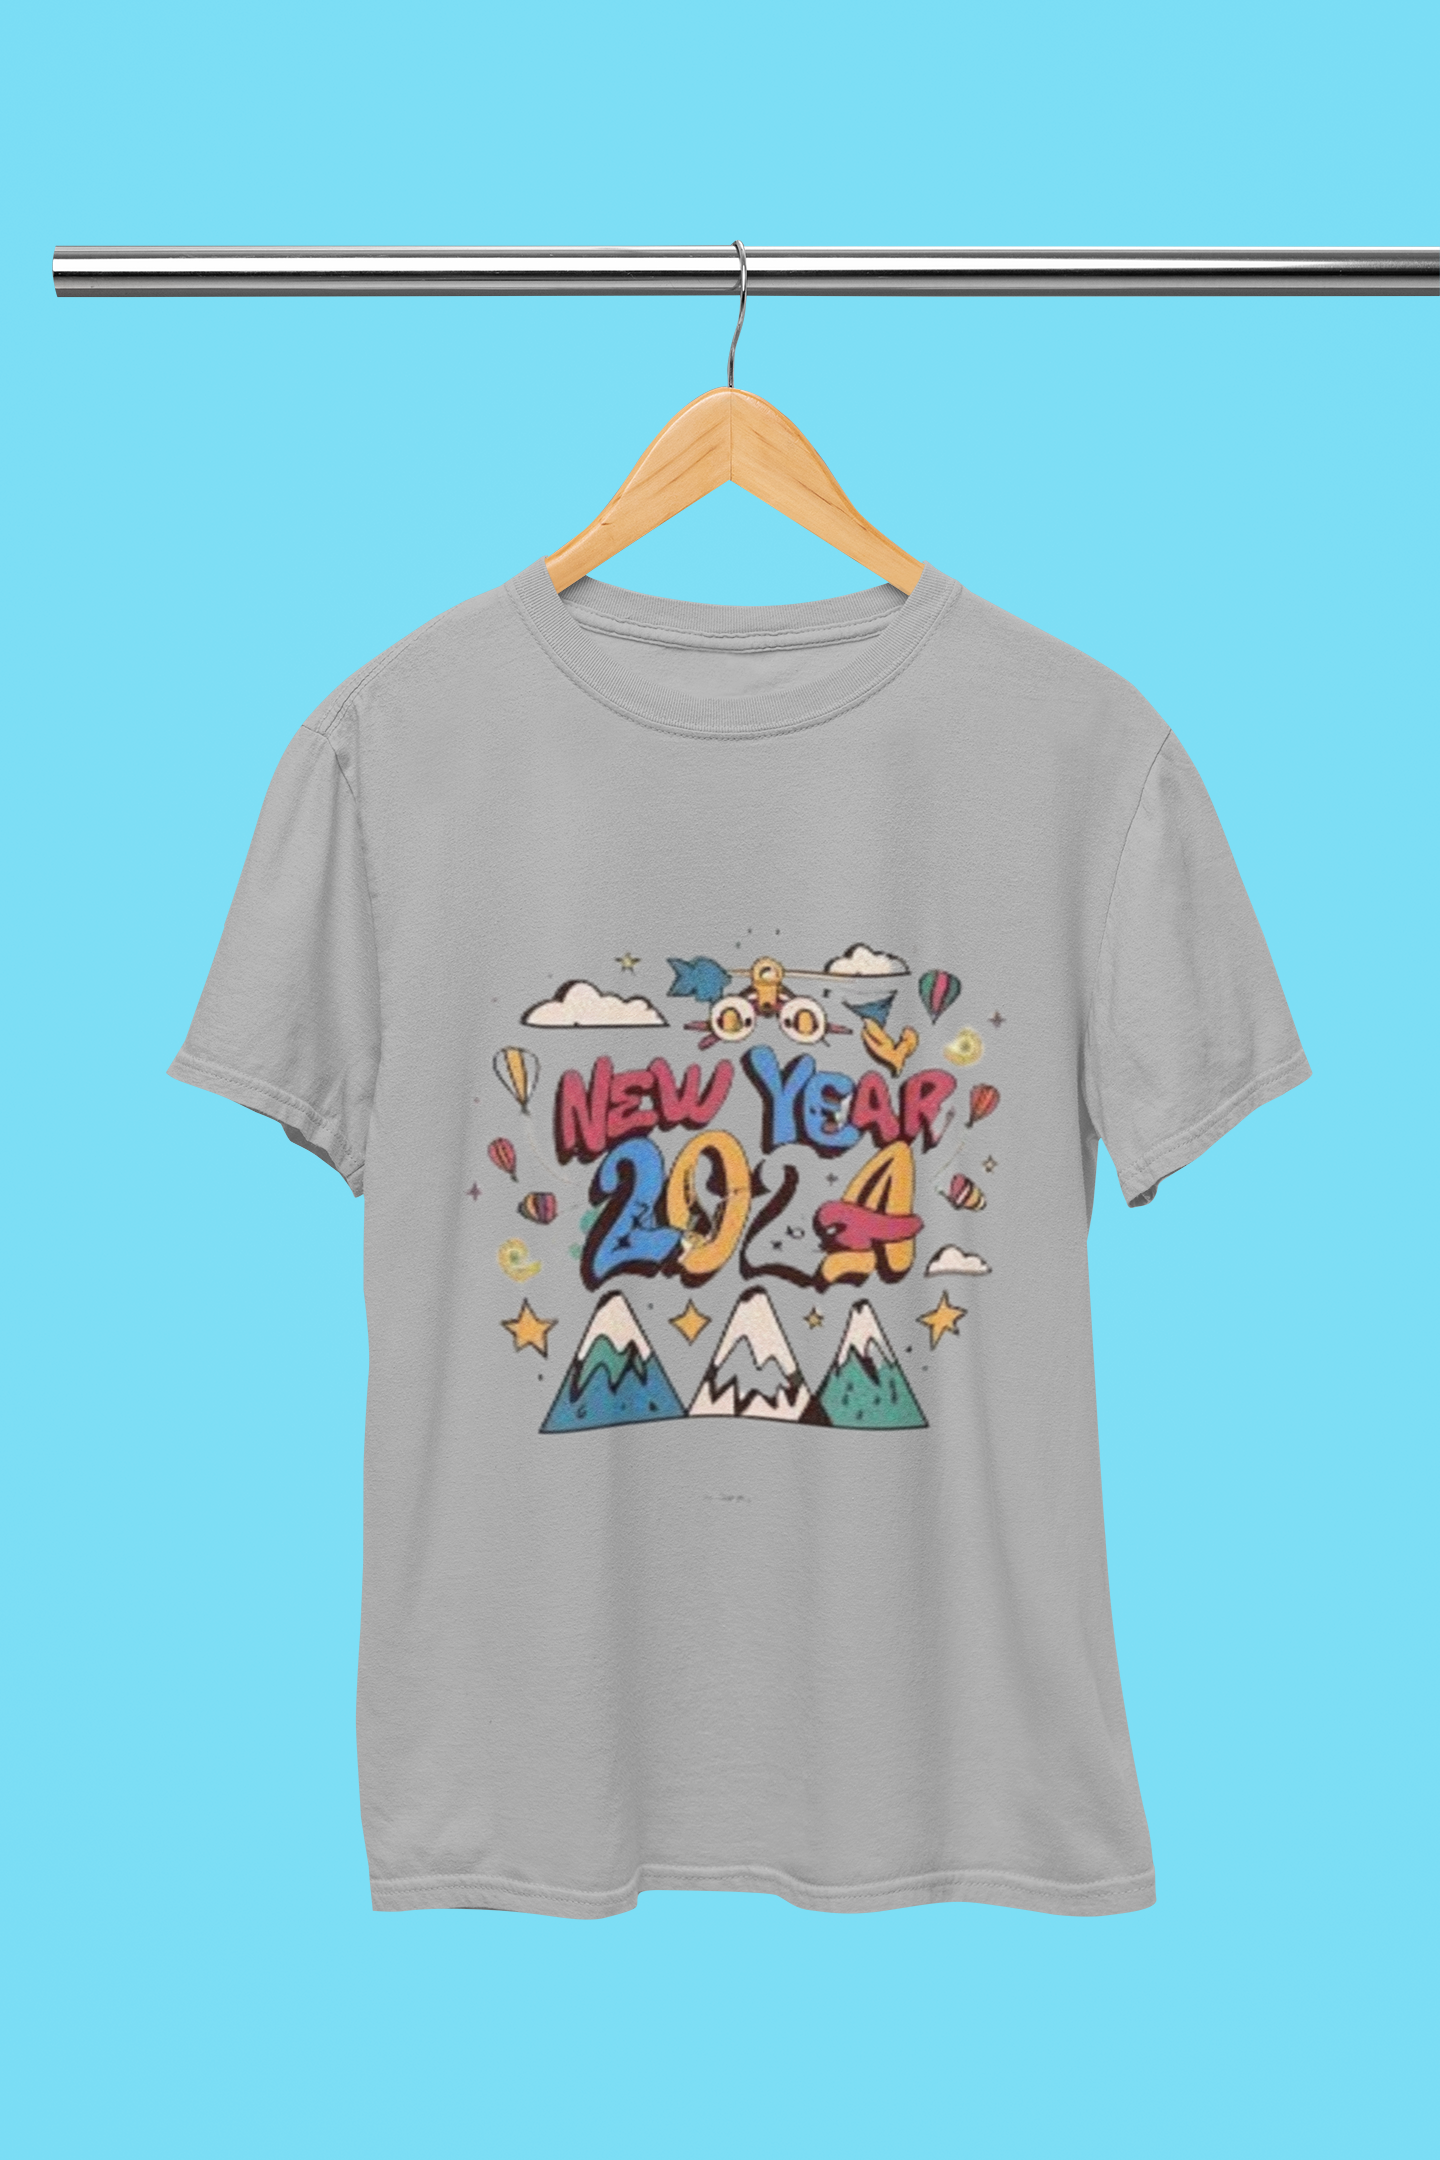 NEW YEAR 2024 SPECIAL T-SHIRT